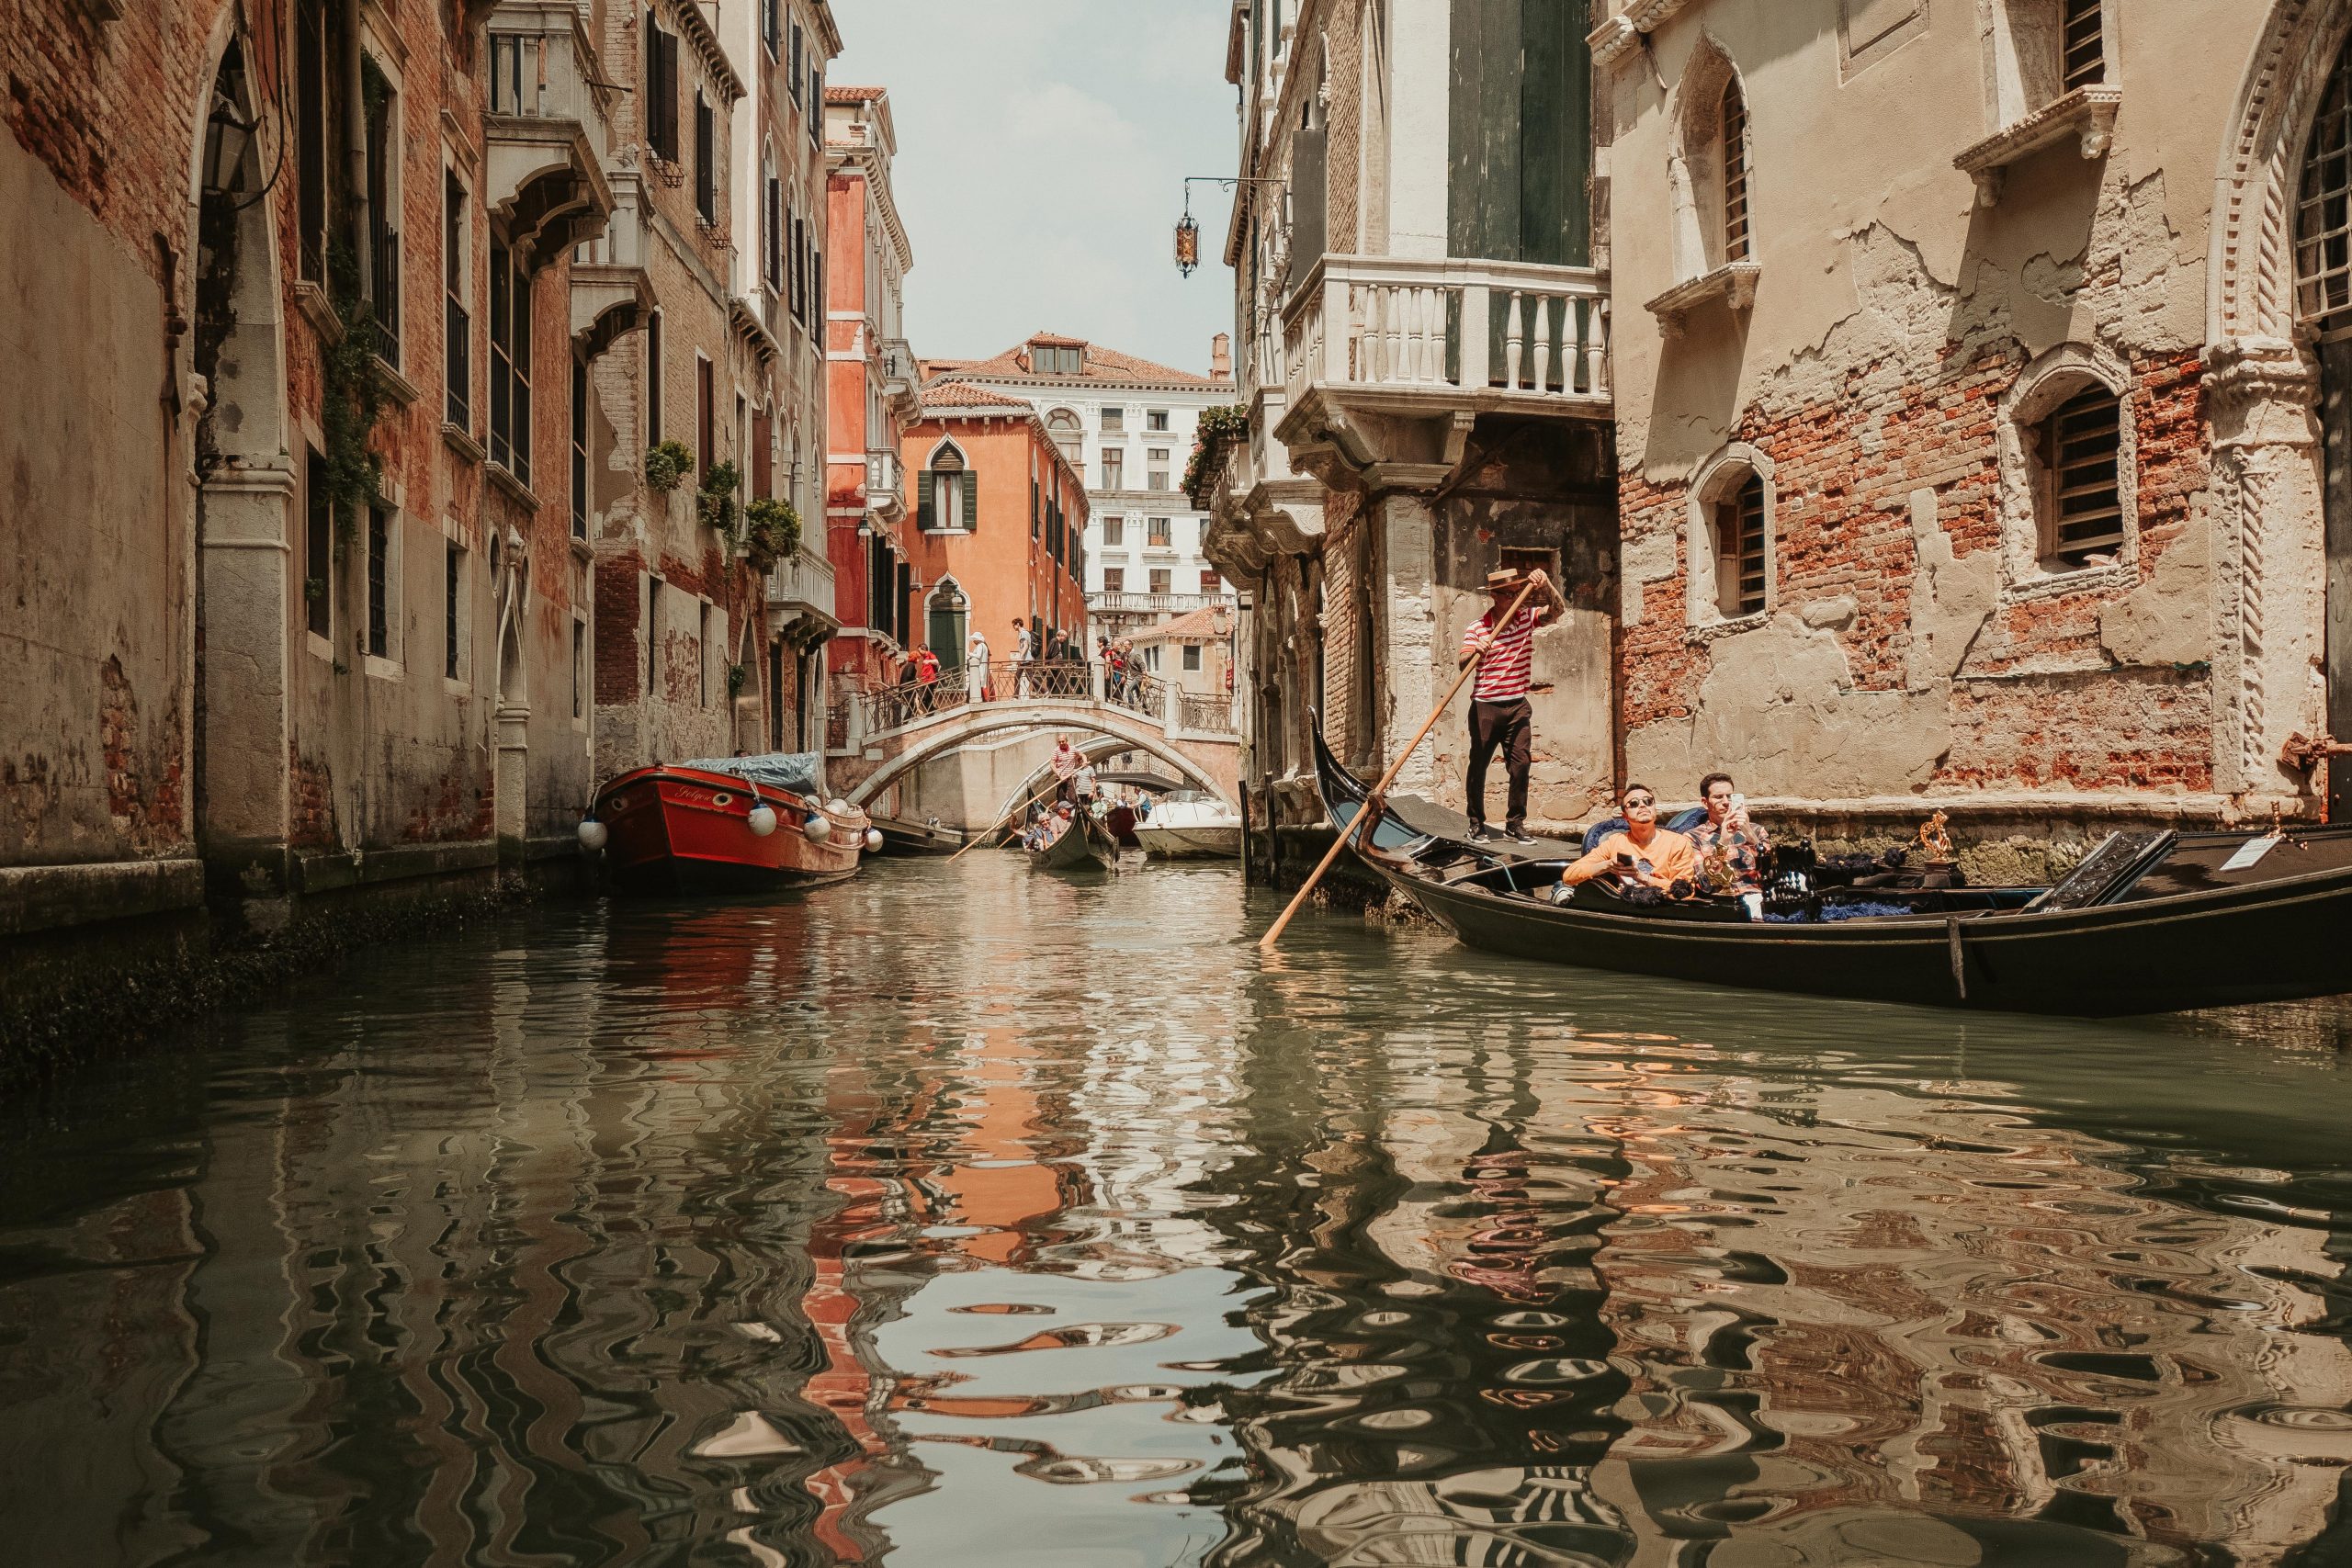 Venice from water looks stunning